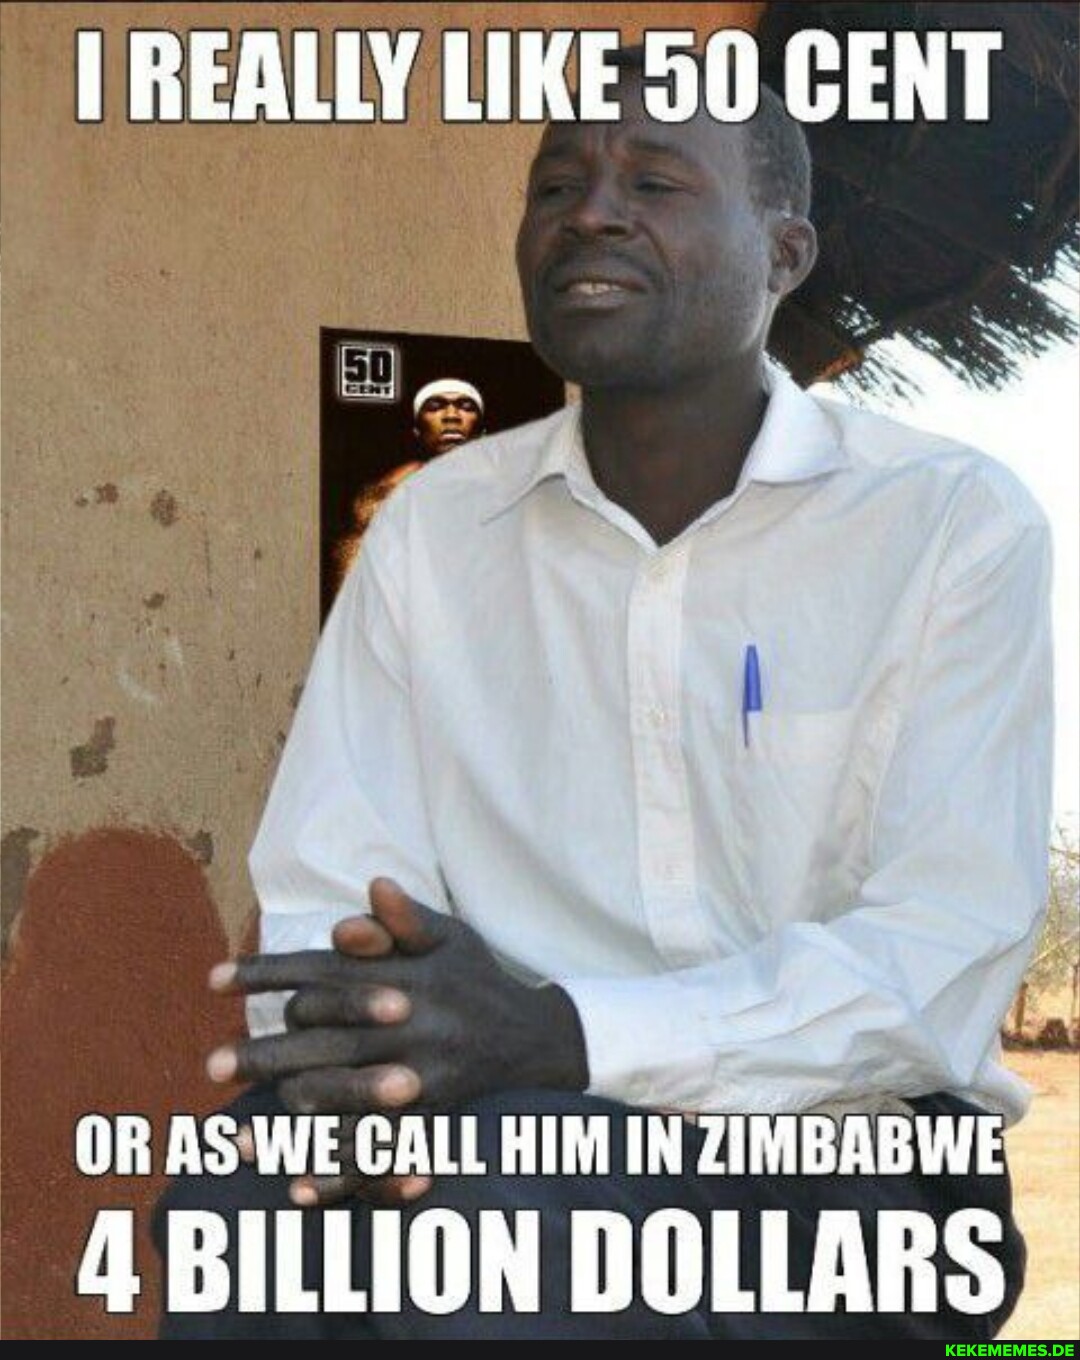 I REALLY LIKE 50 CENT AS WE CALL HIM IN ZIMBABWE OR 4 BILLION DOLLARS